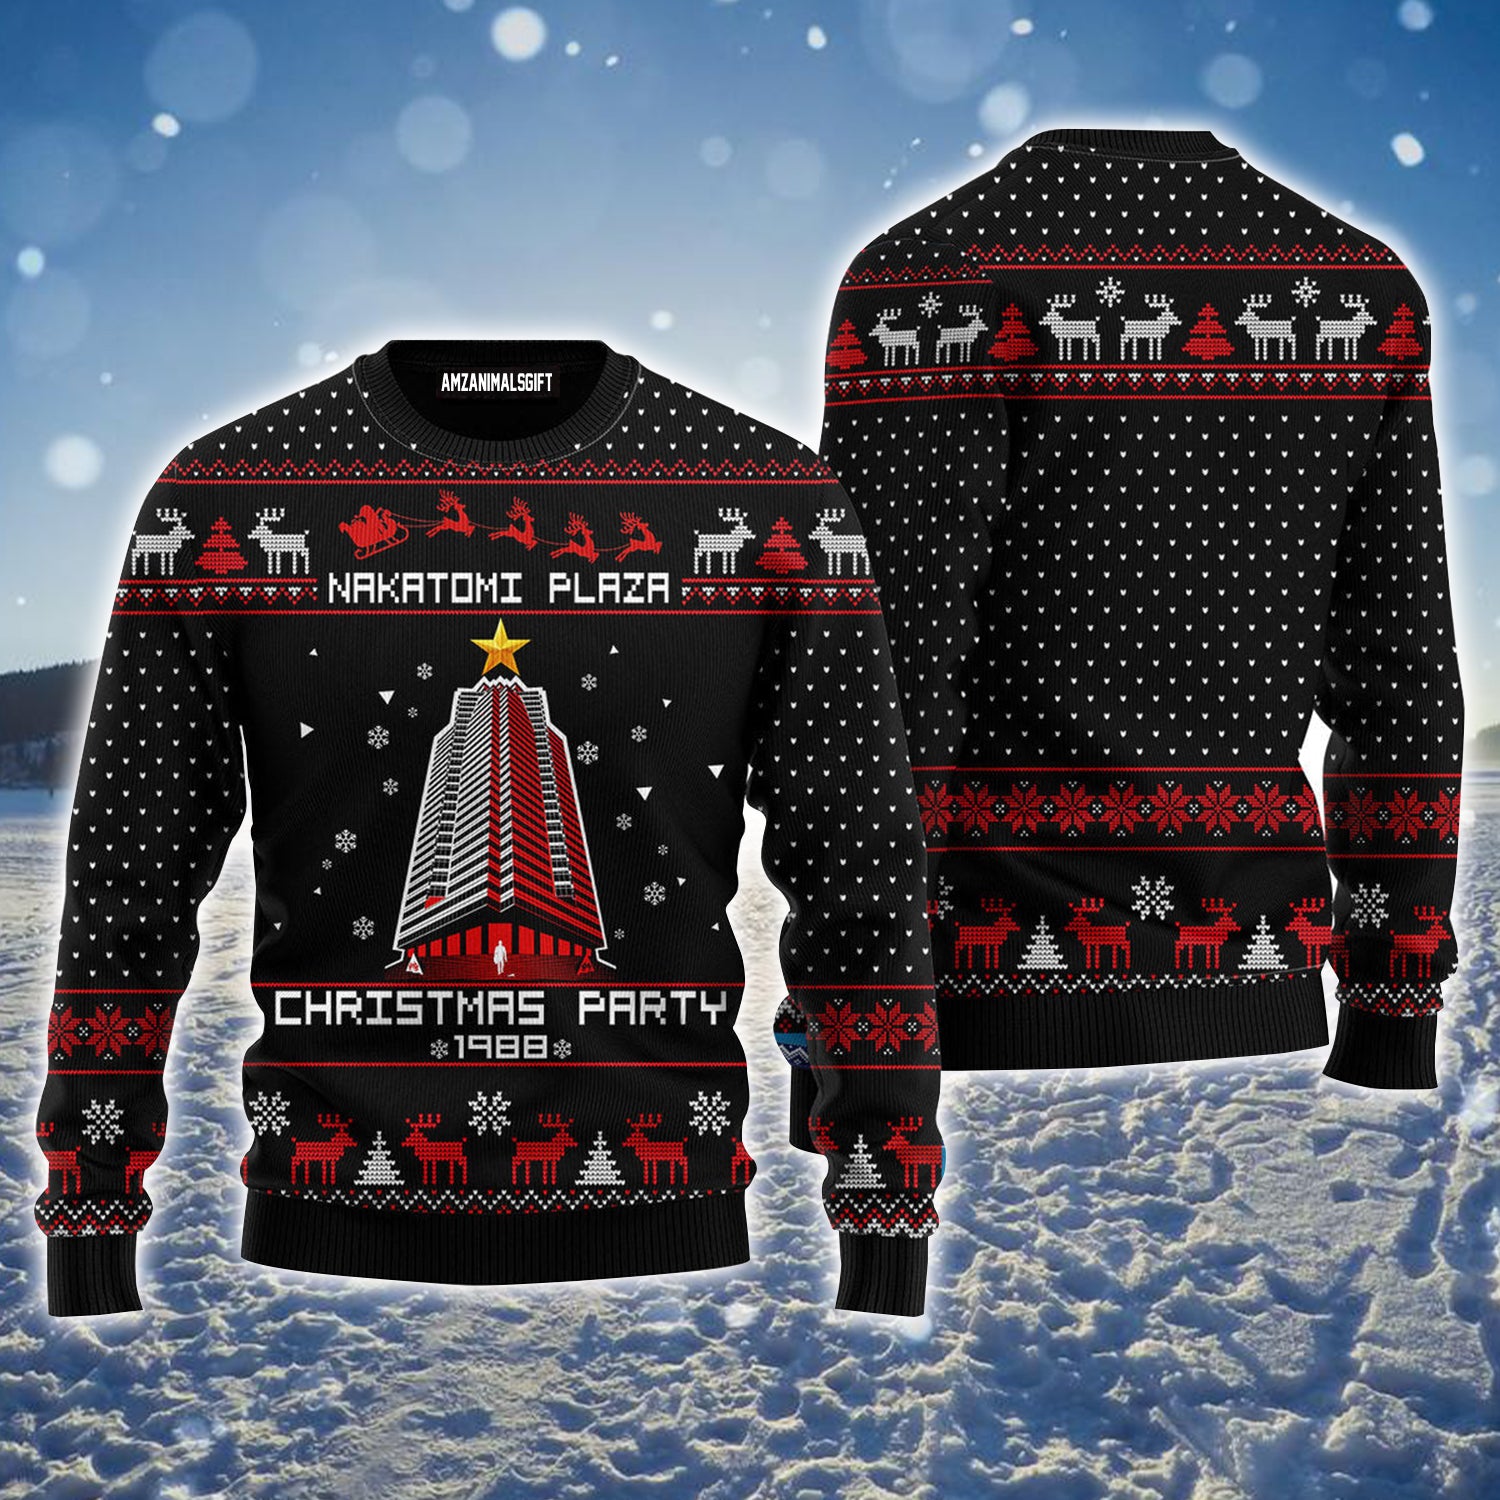 Nakatomi Plaza Ugly Christmas Sweater, Christmas Party 1988 Black Pattern Ugly Sweater For Men & Women - Perfect Gift For Christmas, Family, Friends